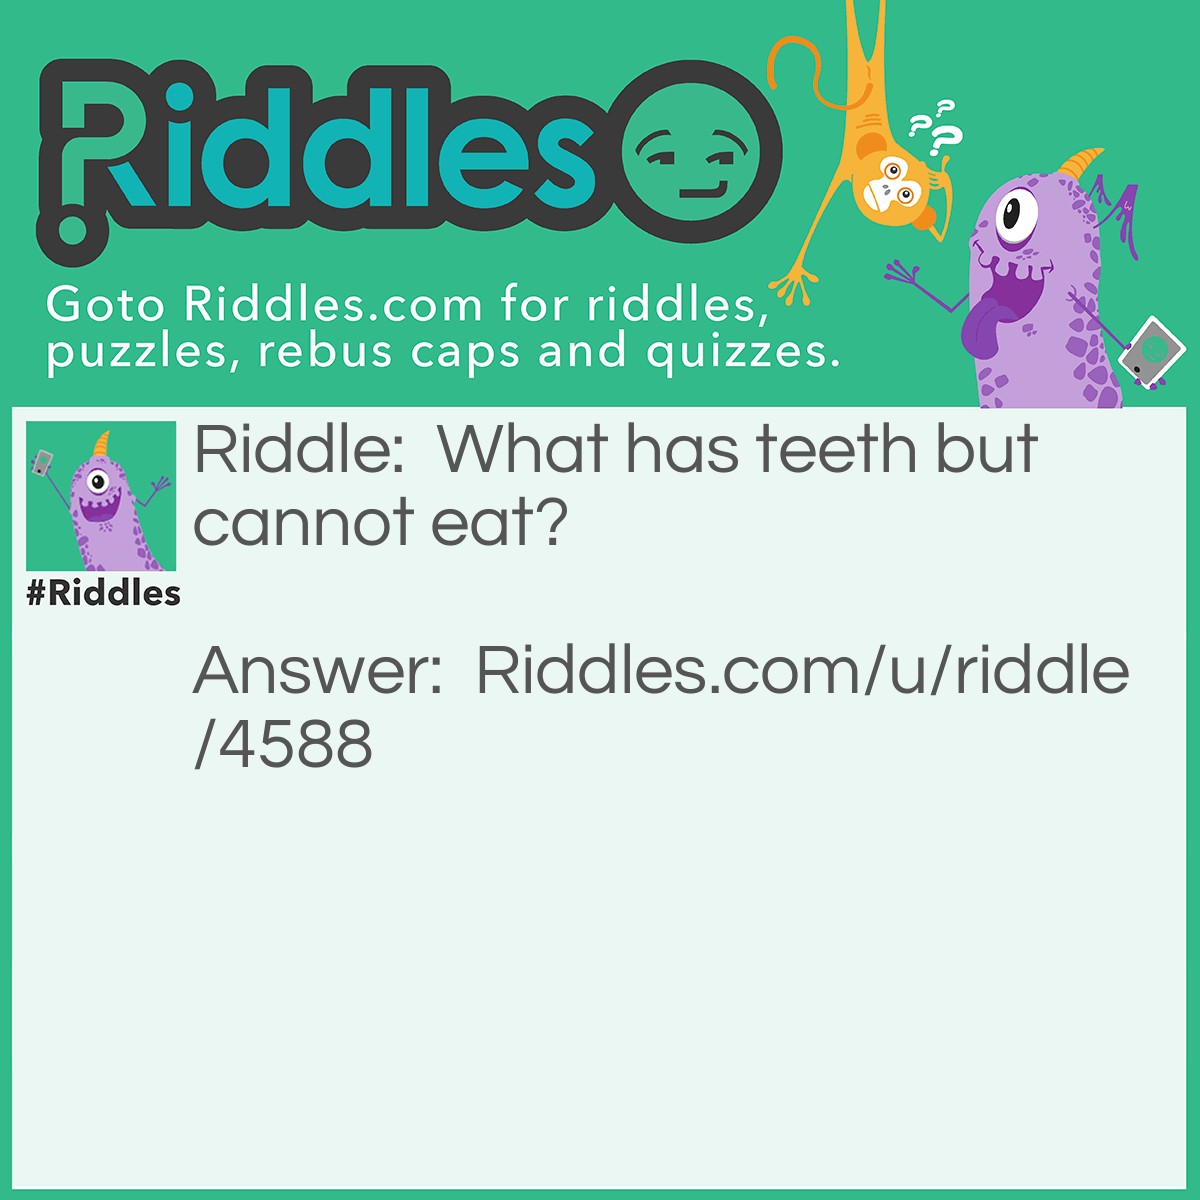 Riddle: What has teeth but cannot eat? Answer: A comb.